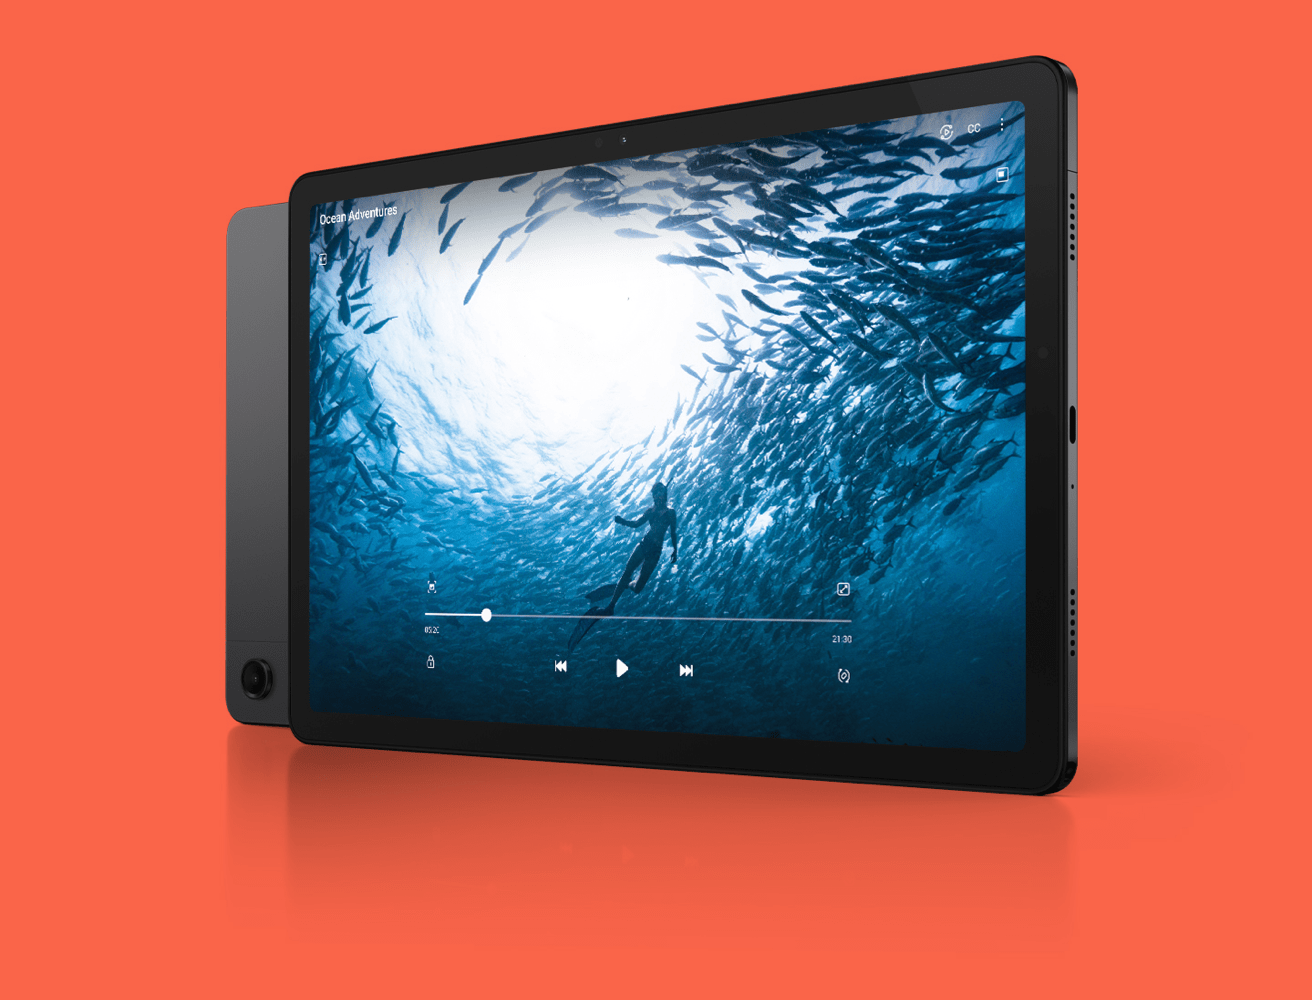 Front view and rear view of Samsung Galaxy Tab A9+ depicted at a three quarter angle facing right in colour Graphite. The front side of the device overlaps the rear side, with the rear camera slightly visible. Video featured on the display depicts a diver under water amongst a school of fish.